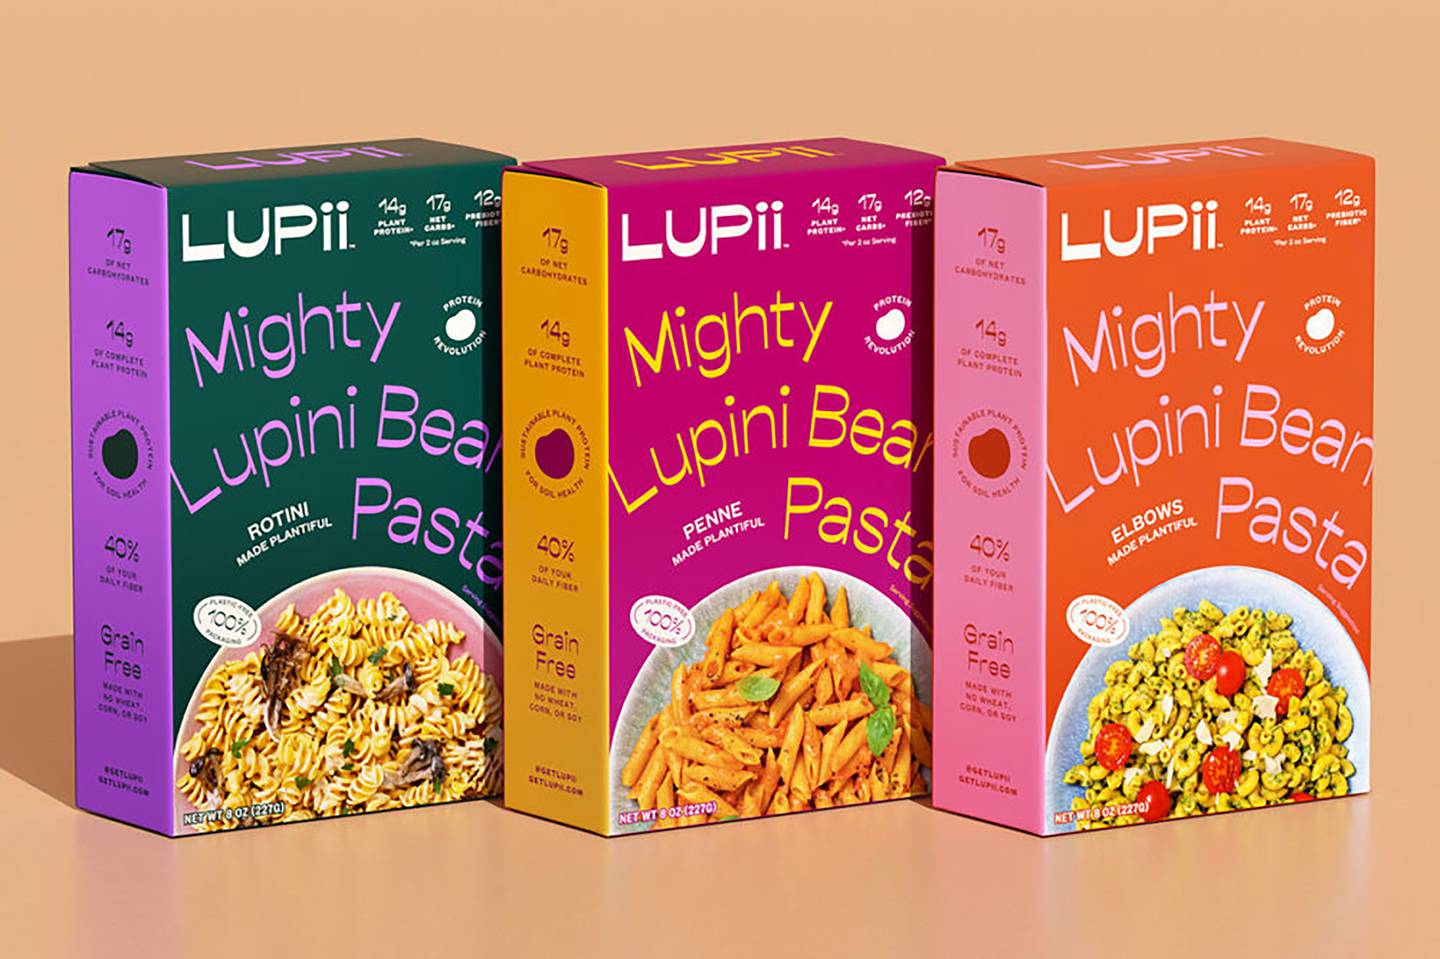 Make your pasta from lupini beans this year. Photo: Lupii